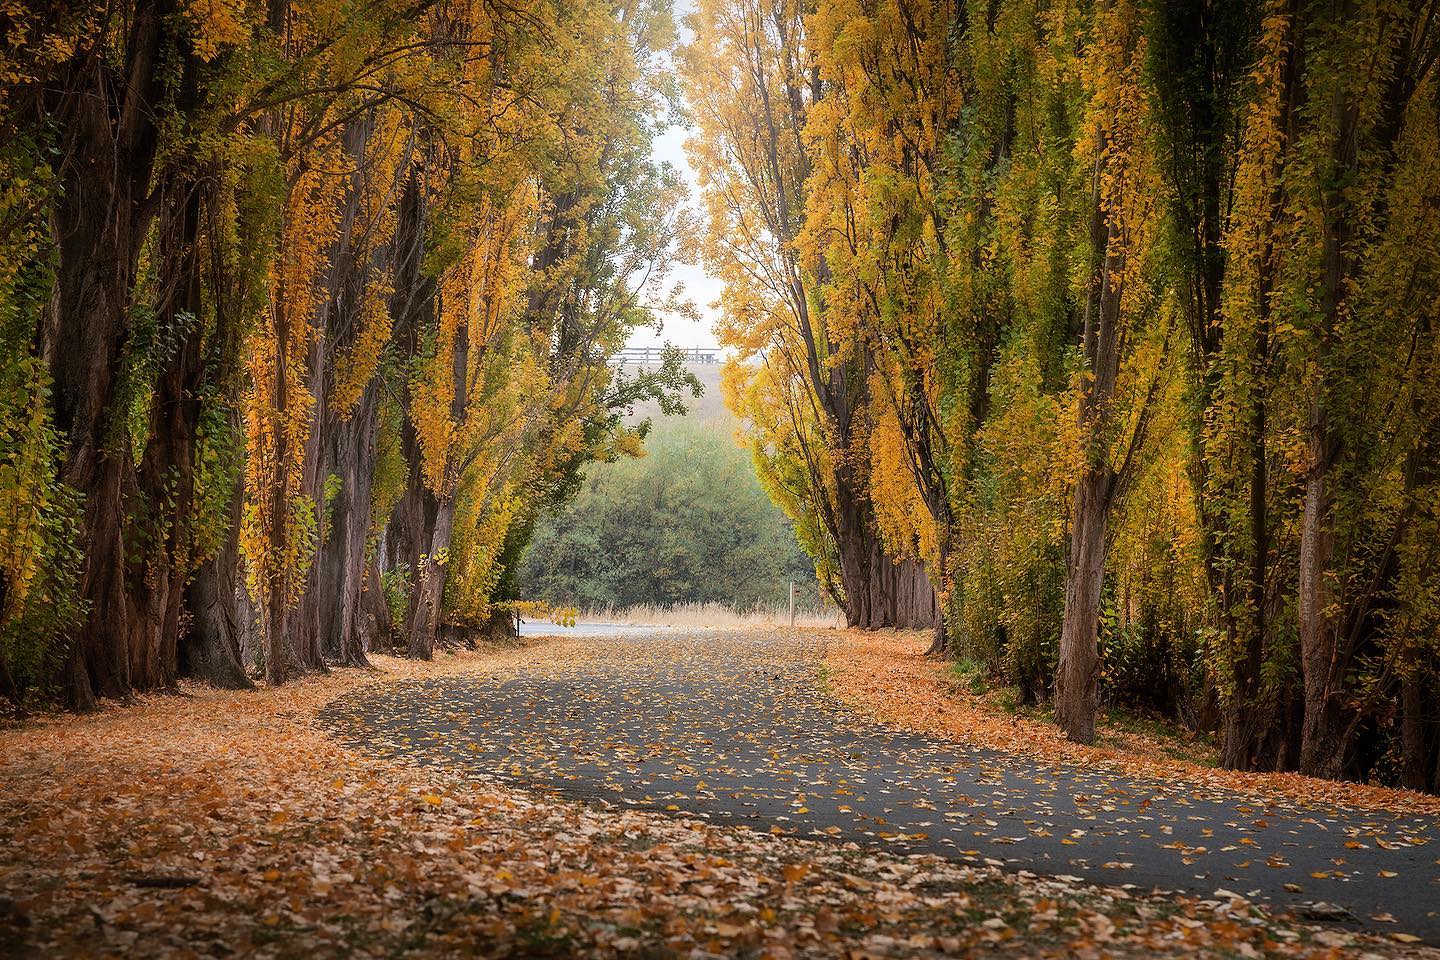 Autumn along the Heritage Highway. Image Credit: @rhyspopephotography